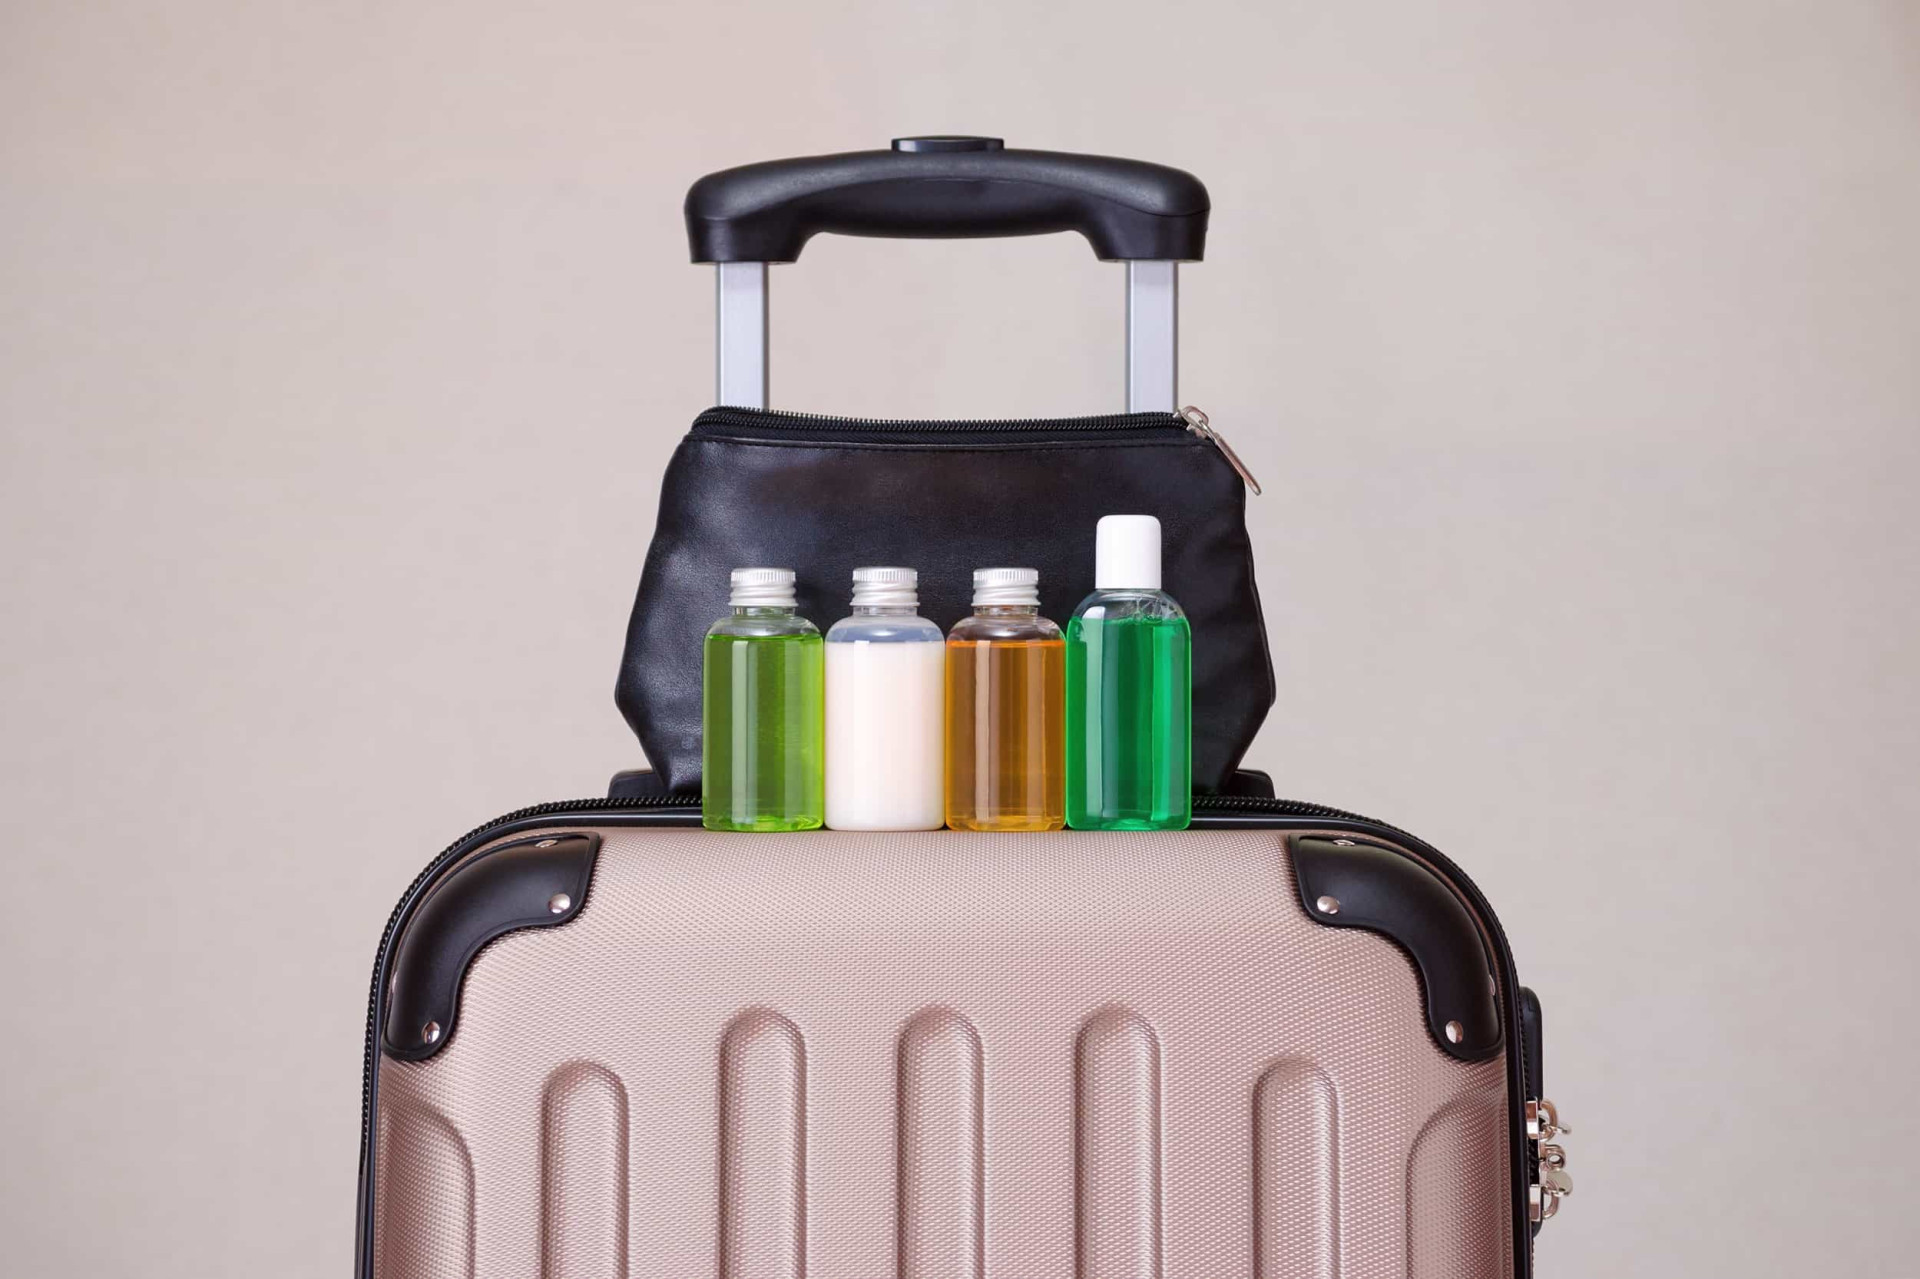 <p>Bring toiletries in your carry-on and make sure to brush your teeth, throw on some deodorant, or even change your clothes in the bathroom. Not only for you, but for everyone else's sake as well!</p><p>You may also like:<a href="https://www.starsinsider.com/n/383371?utm_source=msn.com&utm_medium=display&utm_campaign=referral_description&utm_content=500296v1en-us"> 'Twilight Zone: The Movie' and other TV and film accidents</a></p>